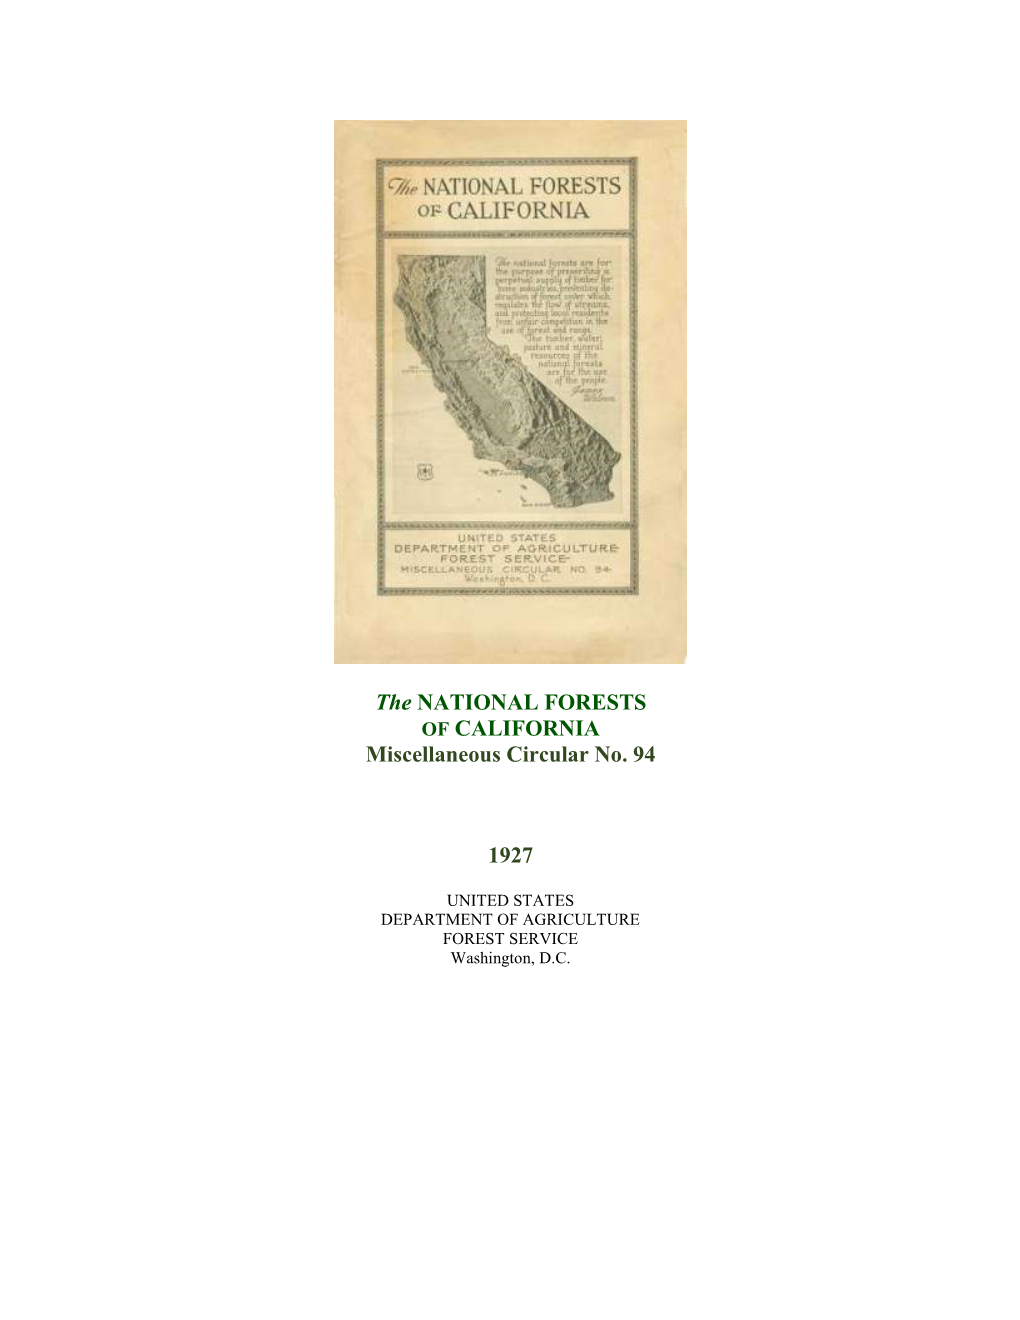 The NATIONAL FORESTS of CALIFORNIA Miscellaneous Circular No